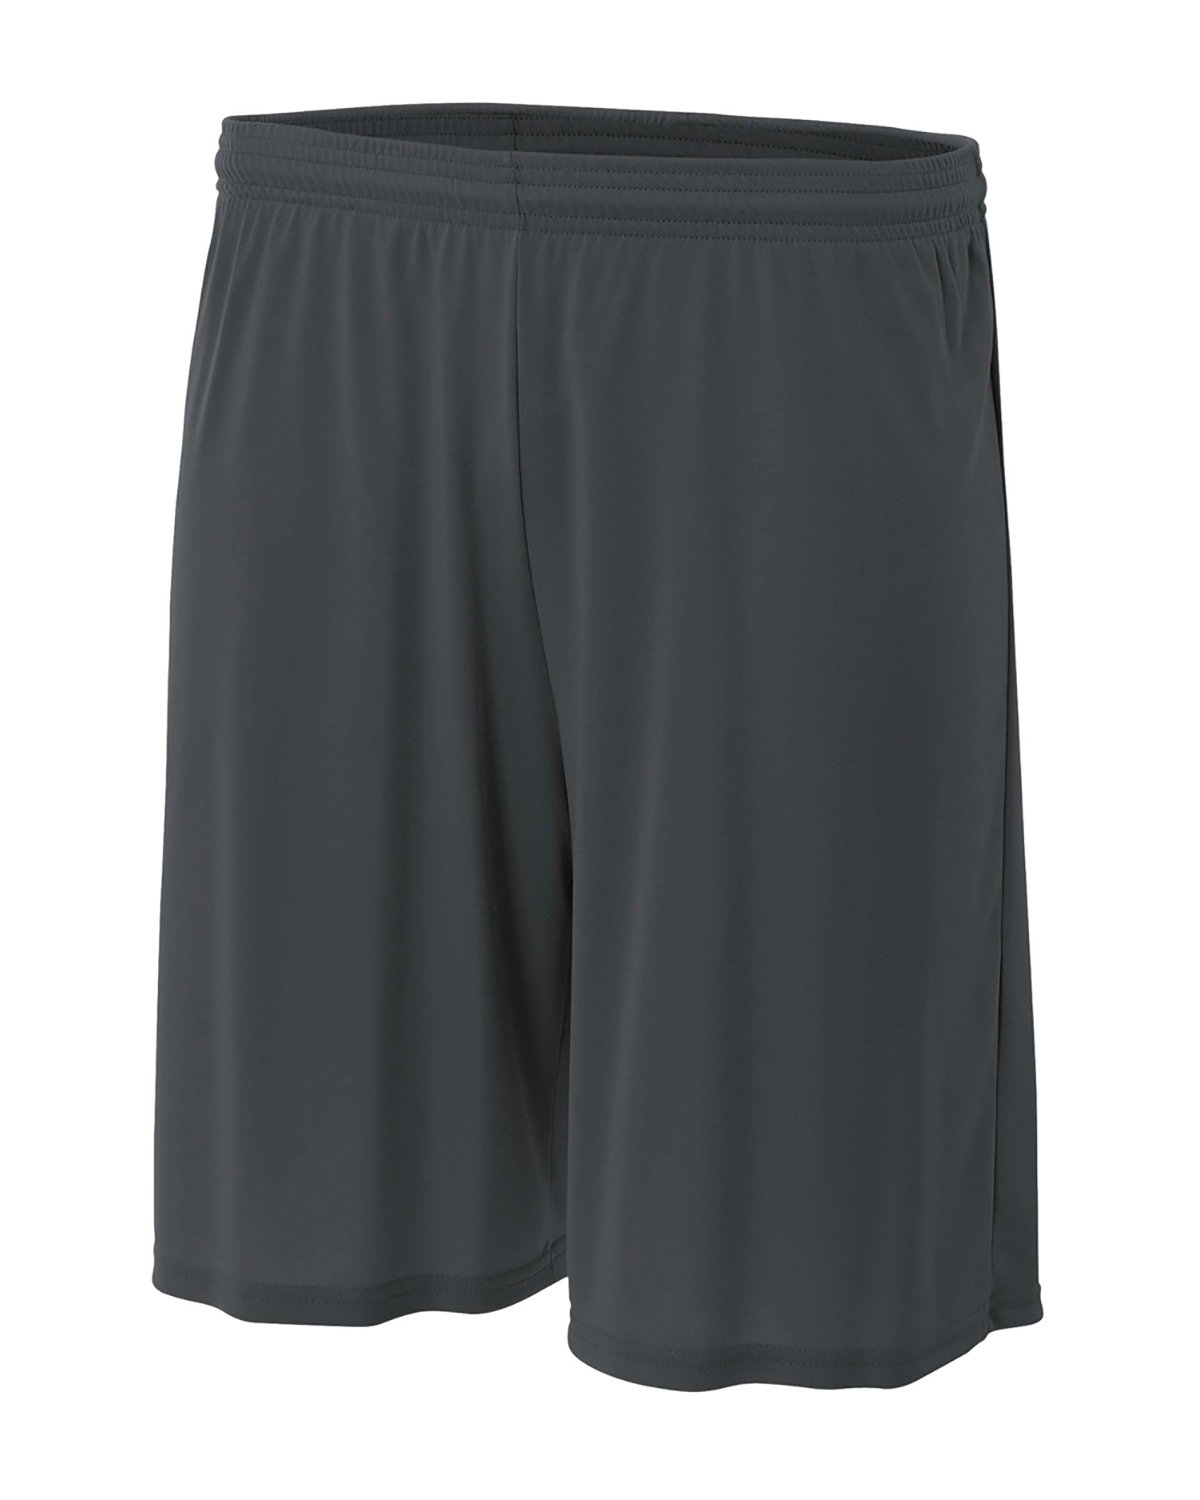 A4 Youth Cooling Performance Polyester Short GRAPHITE 